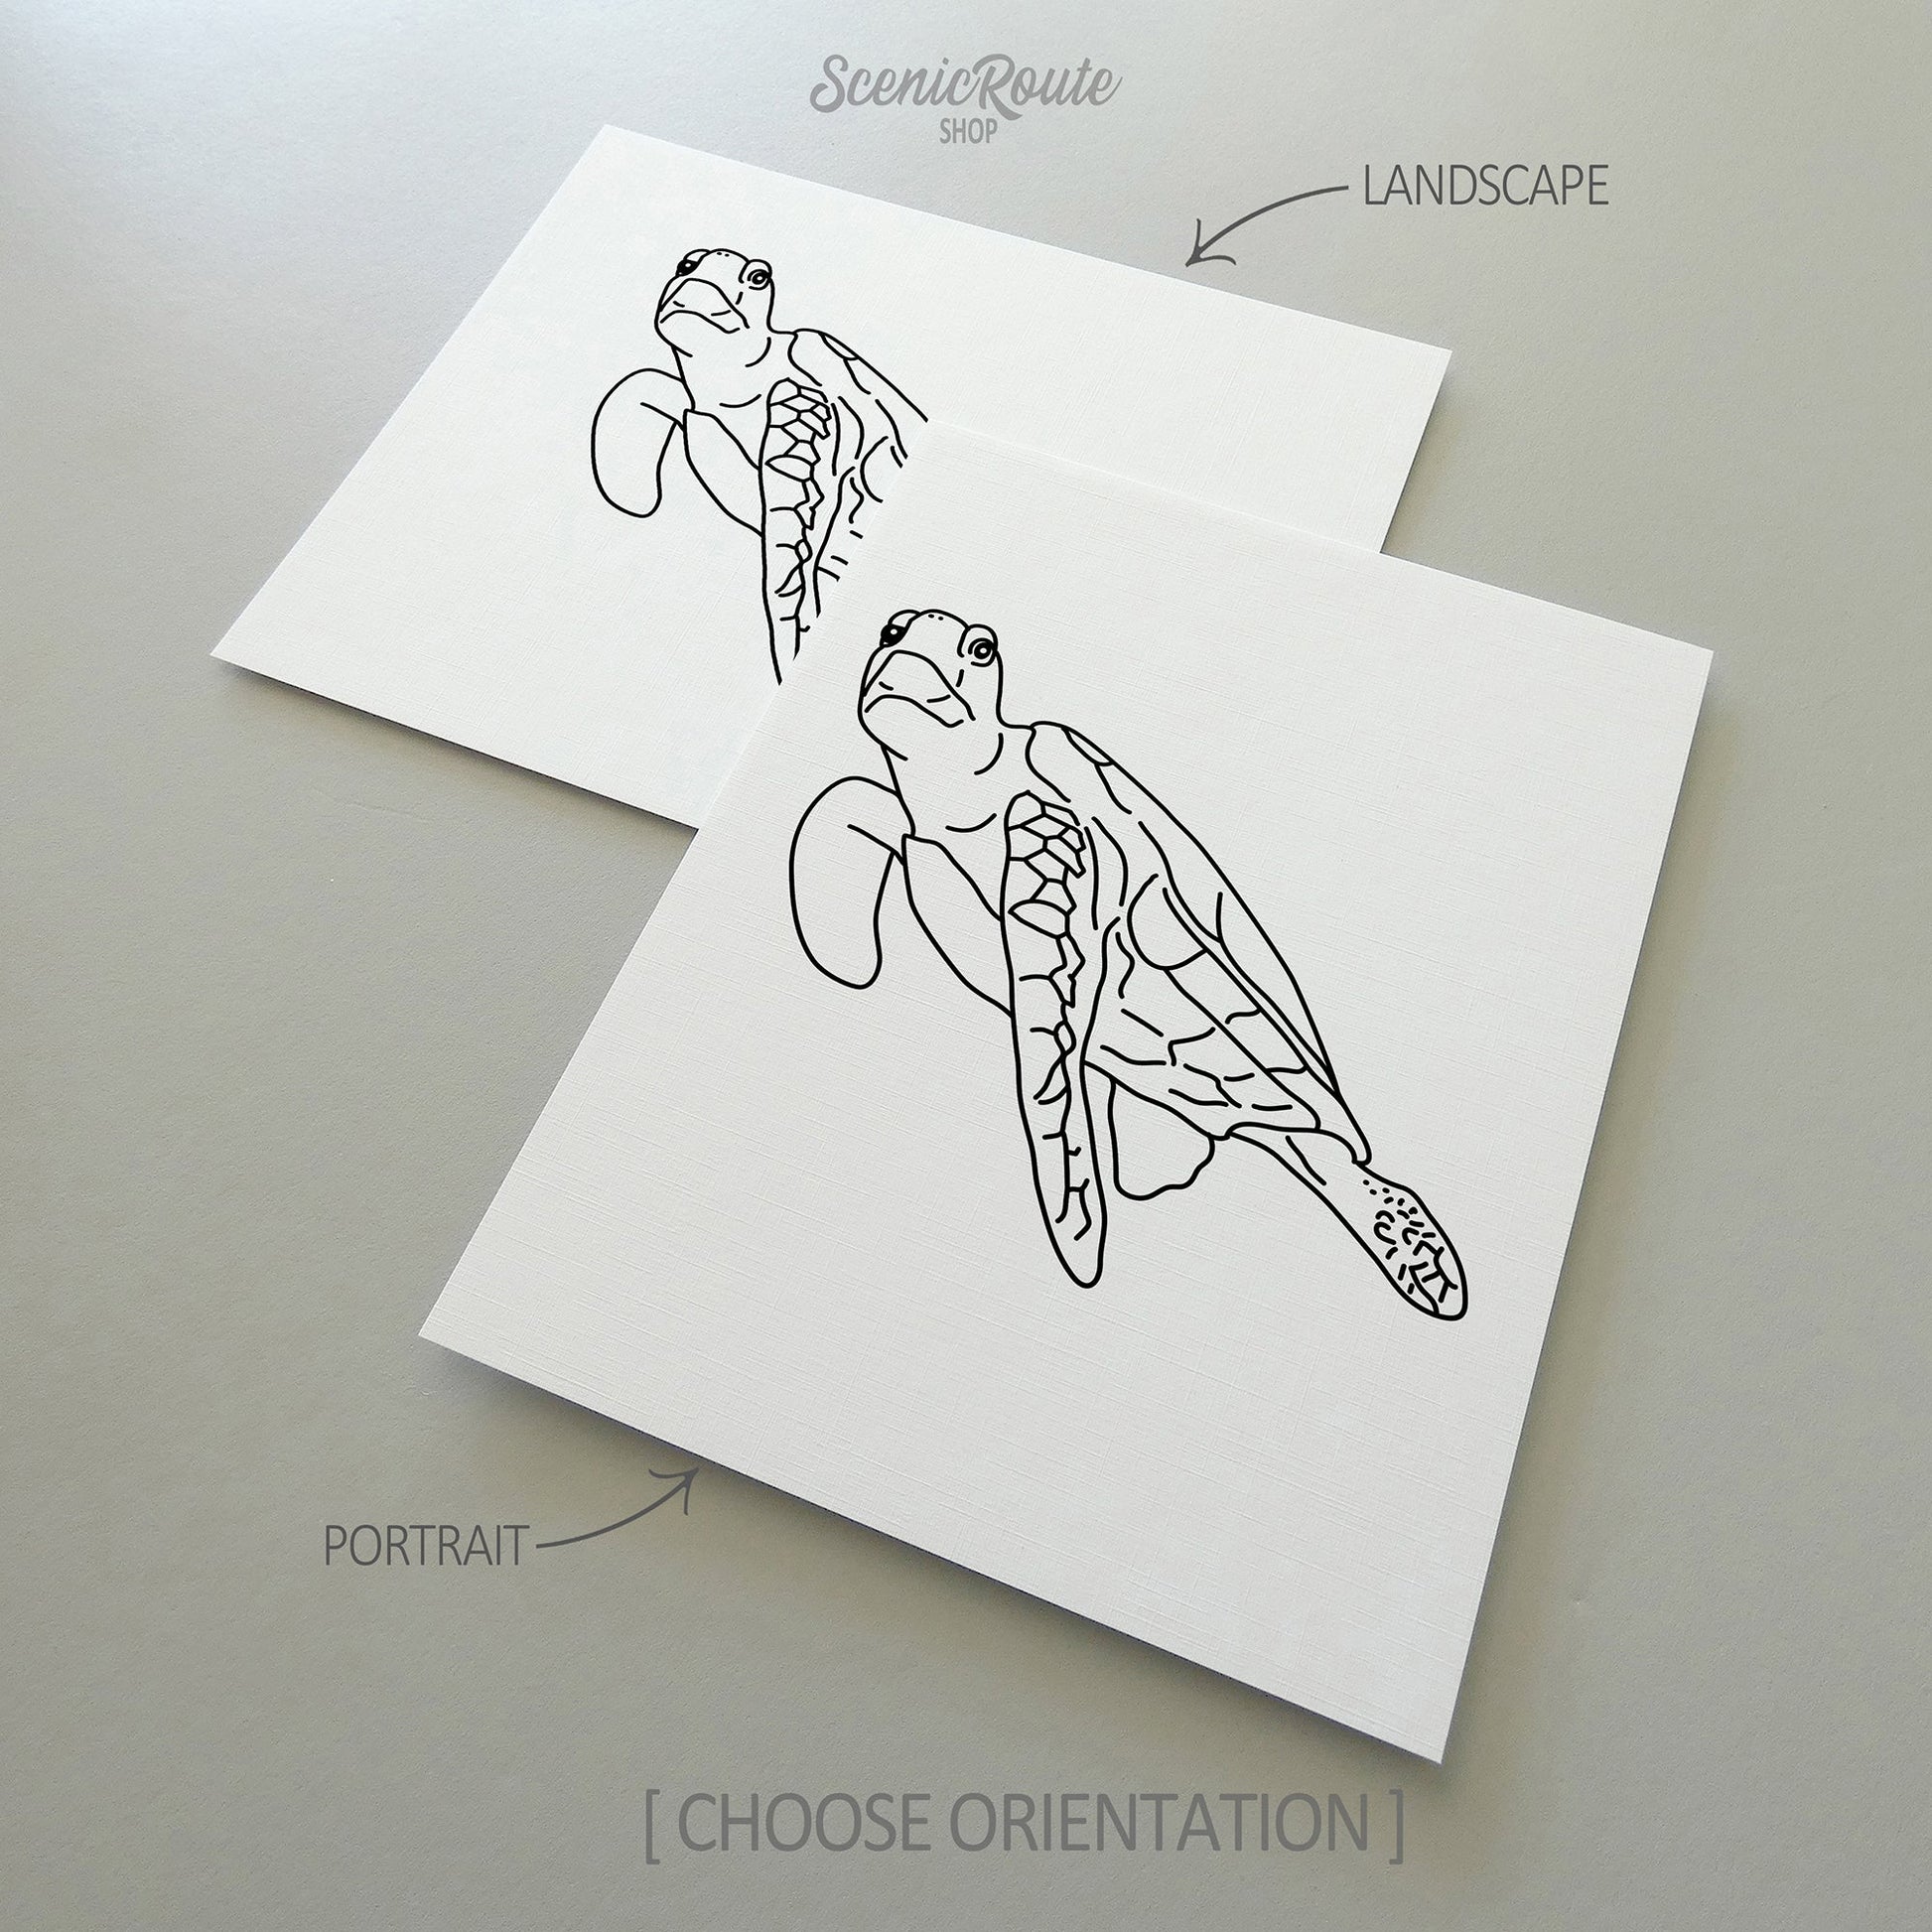 Two line art drawings of a Sea Turtle on white linen paper with a gray background.  The pieces are shown in portrait and landscape orientation for the available art print options.